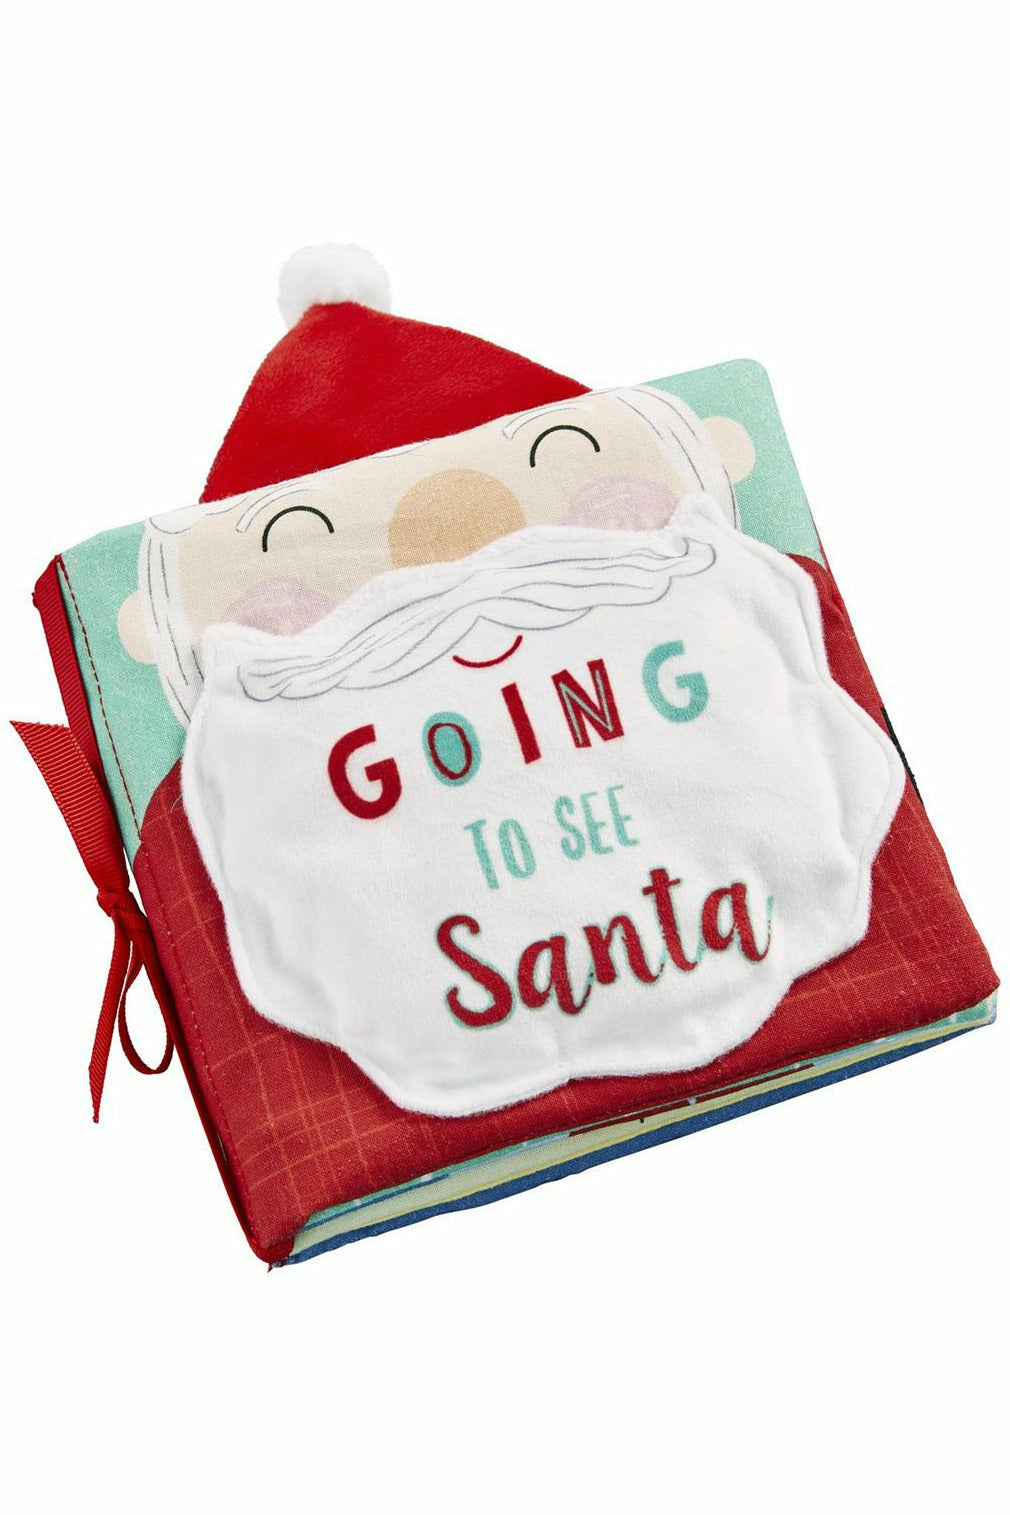 GOING TO SEE SANTA SOFT BOOK